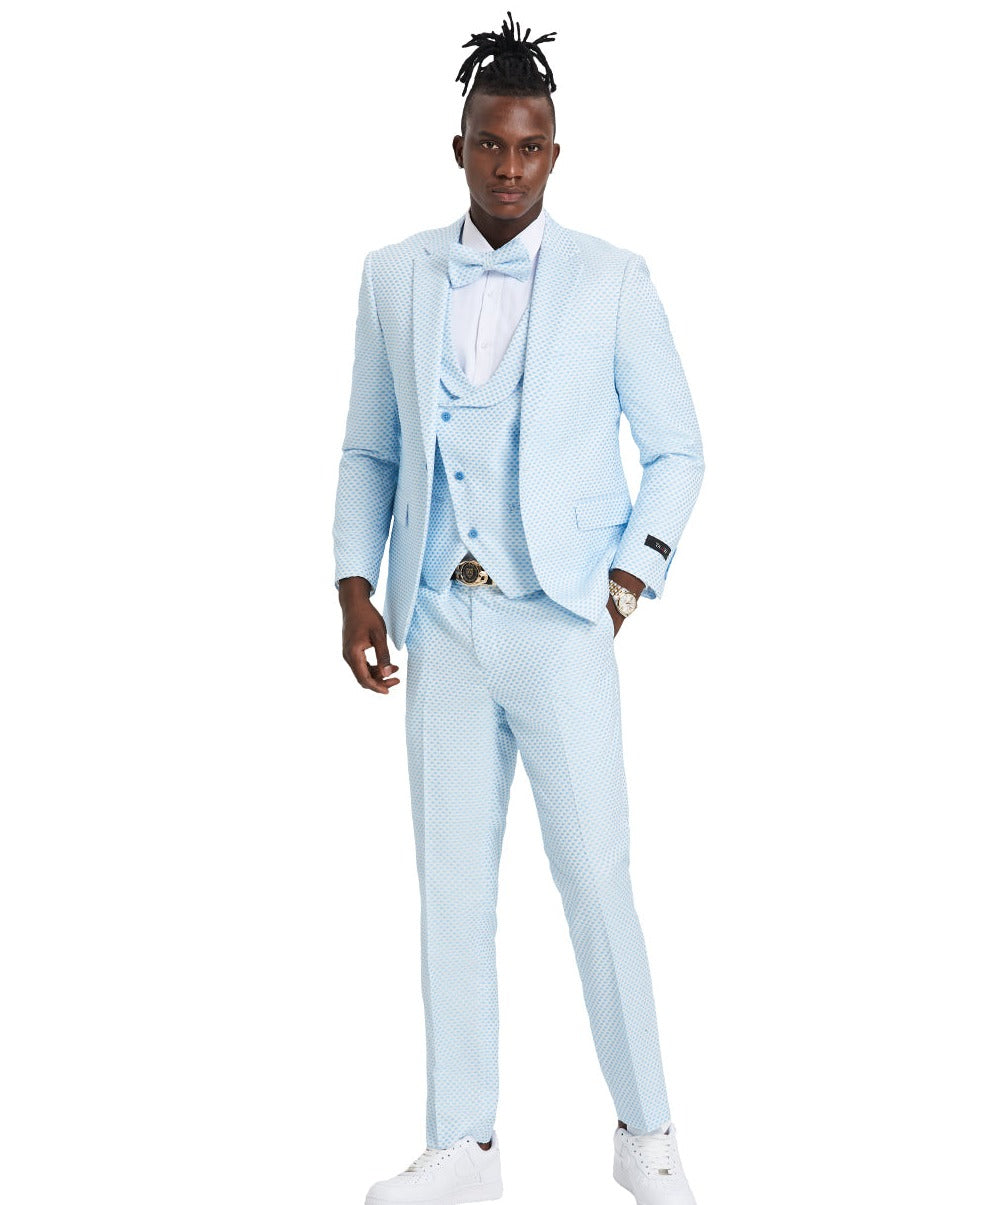 Men's Sky Blue 3 PC Suit with U-Shaped Shawl Collared Vest